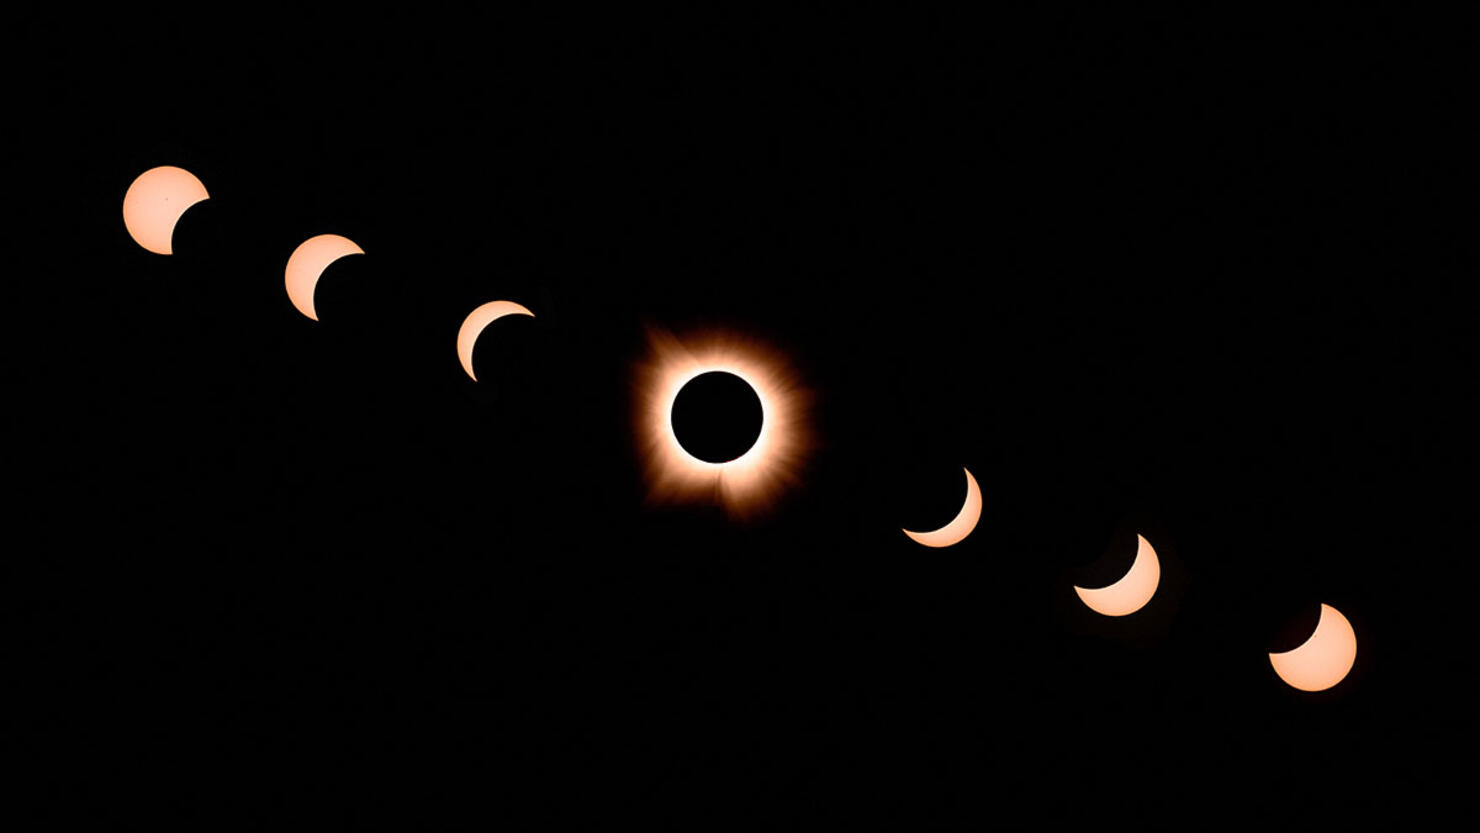 TOPSHOT-US-ASTRONOMY-ECLIPSE